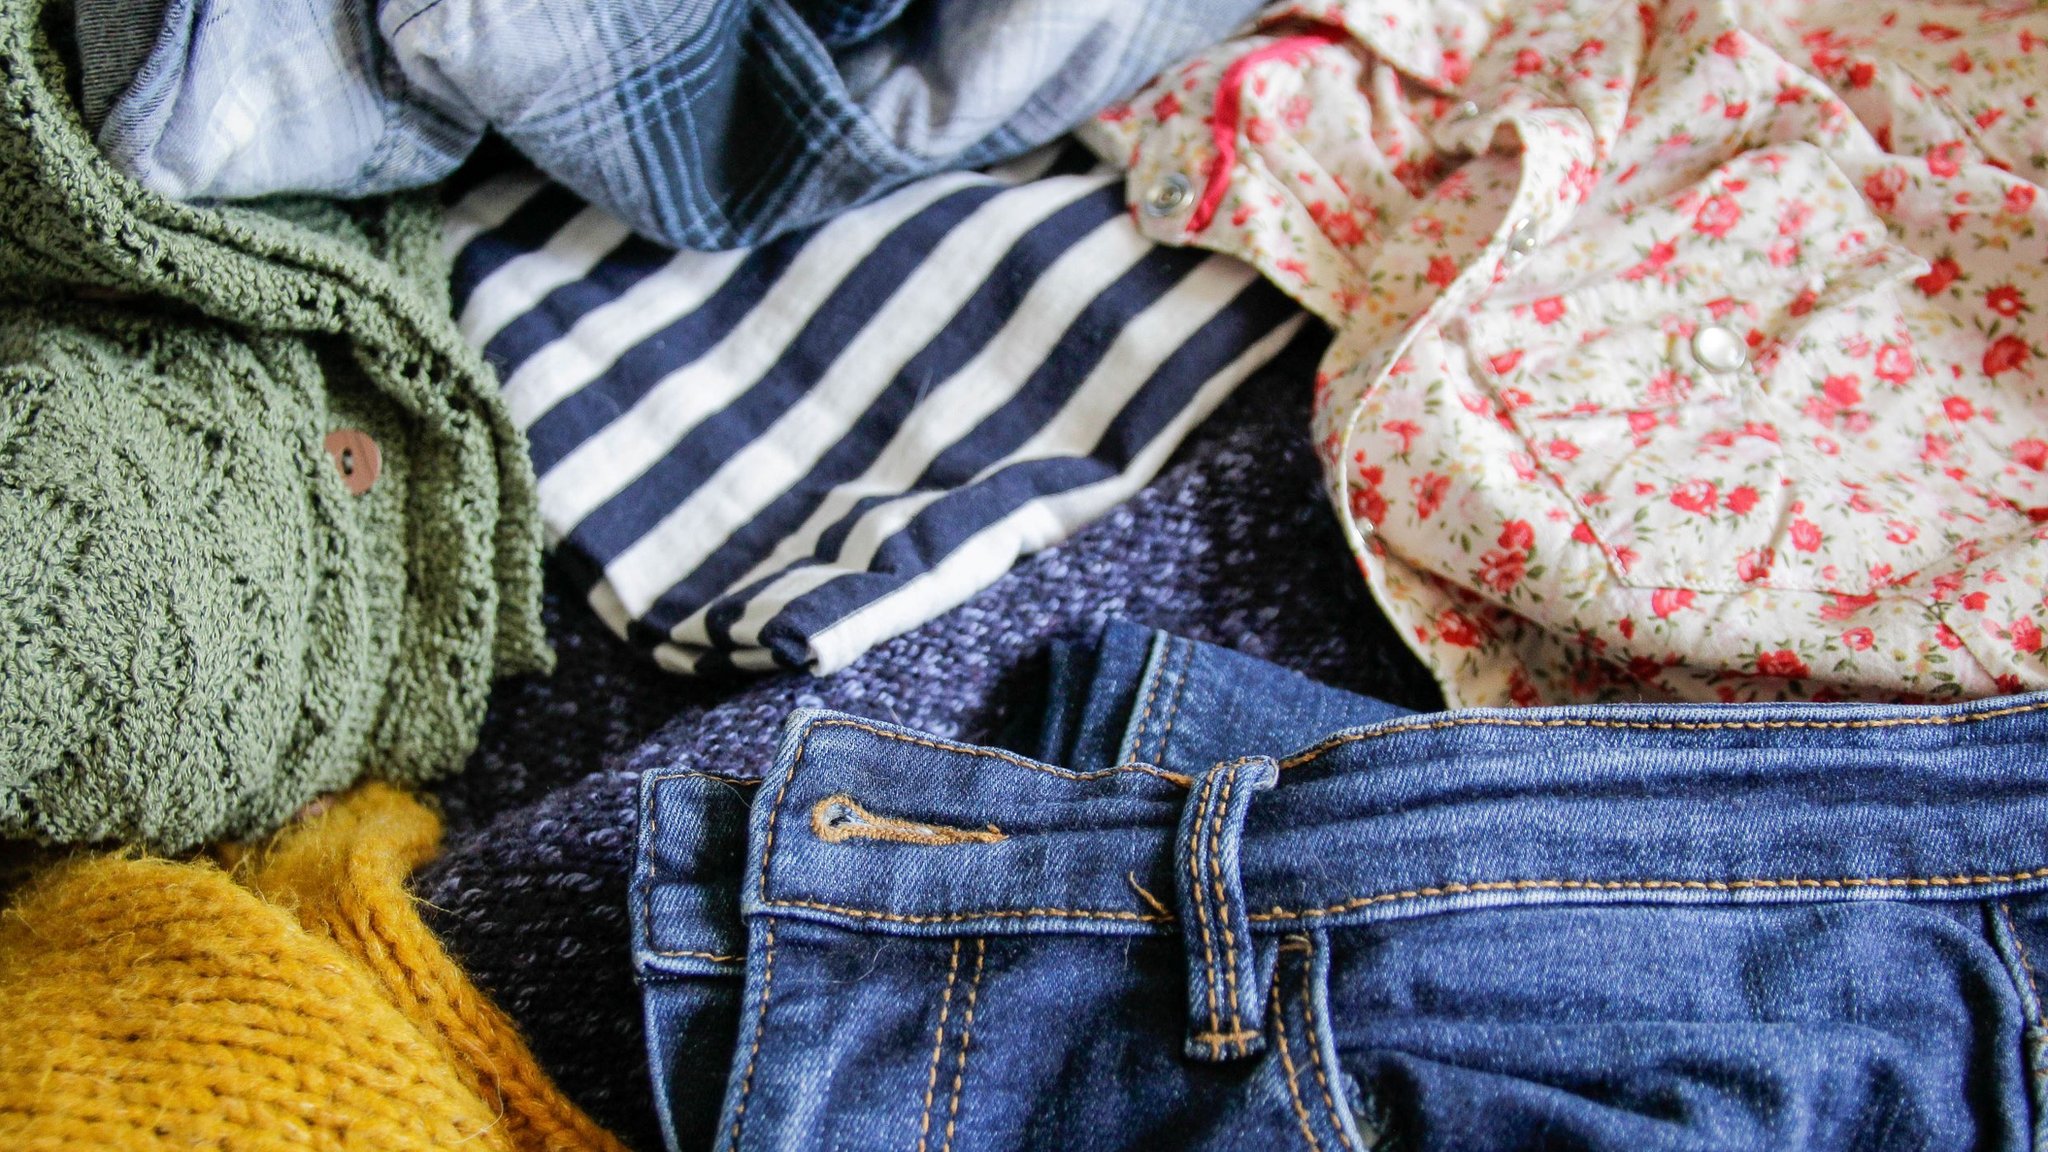 Household textile waste worst for environment